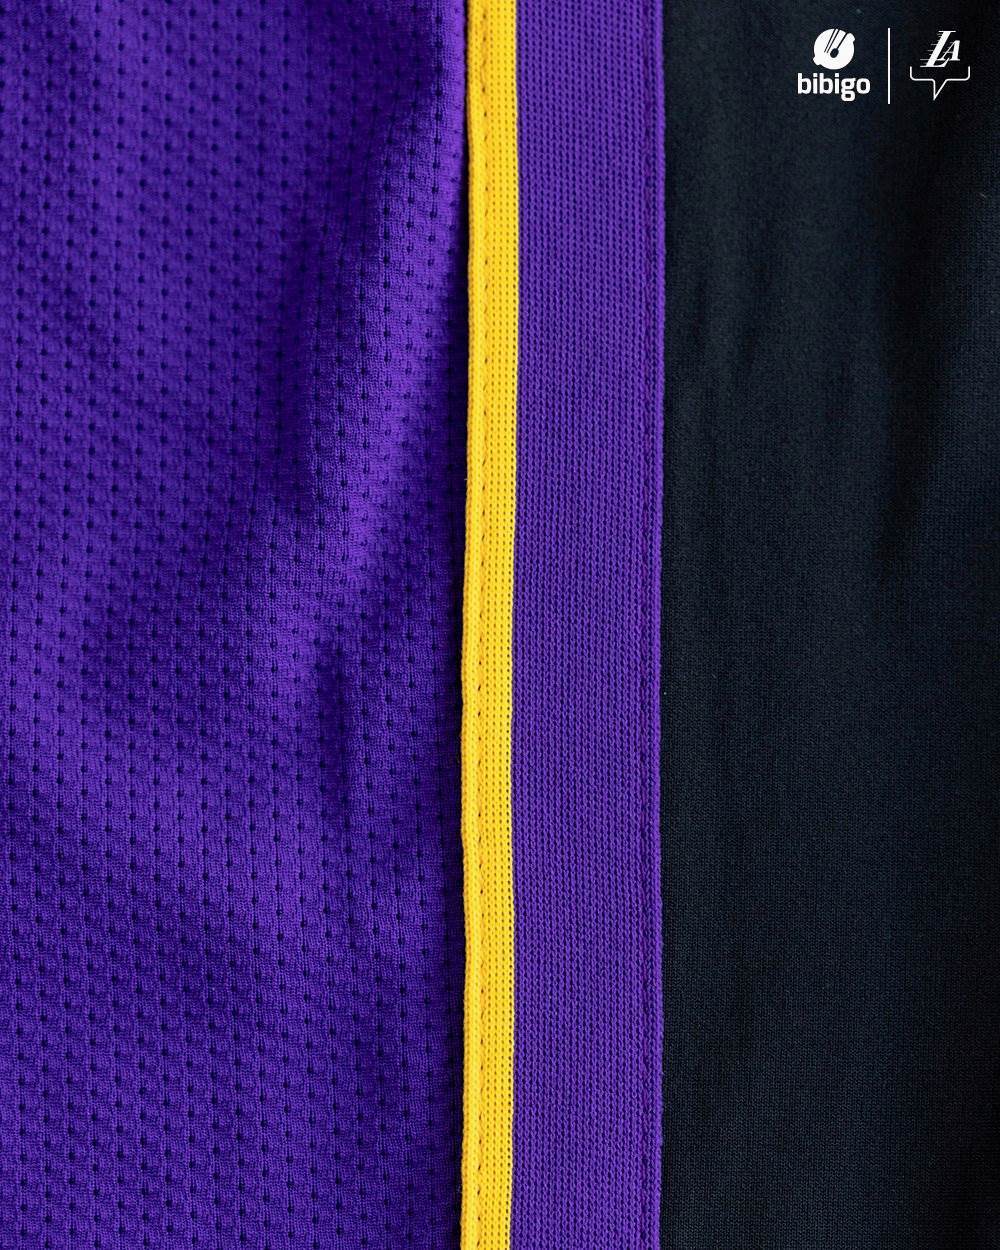 Los Angeles Lakers 22-23 Statement Jersey Revealed